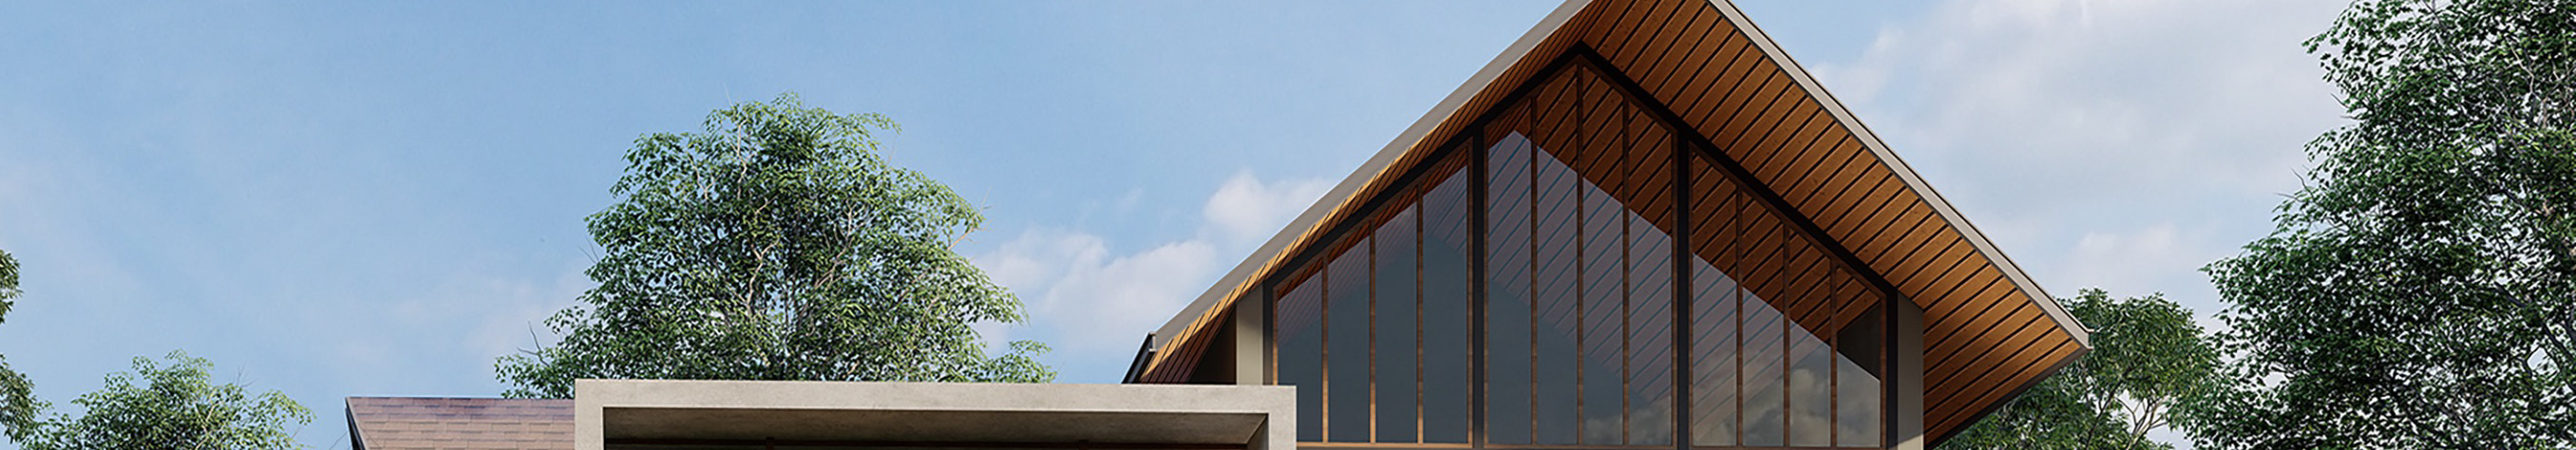 Greenline Architects's profile banner